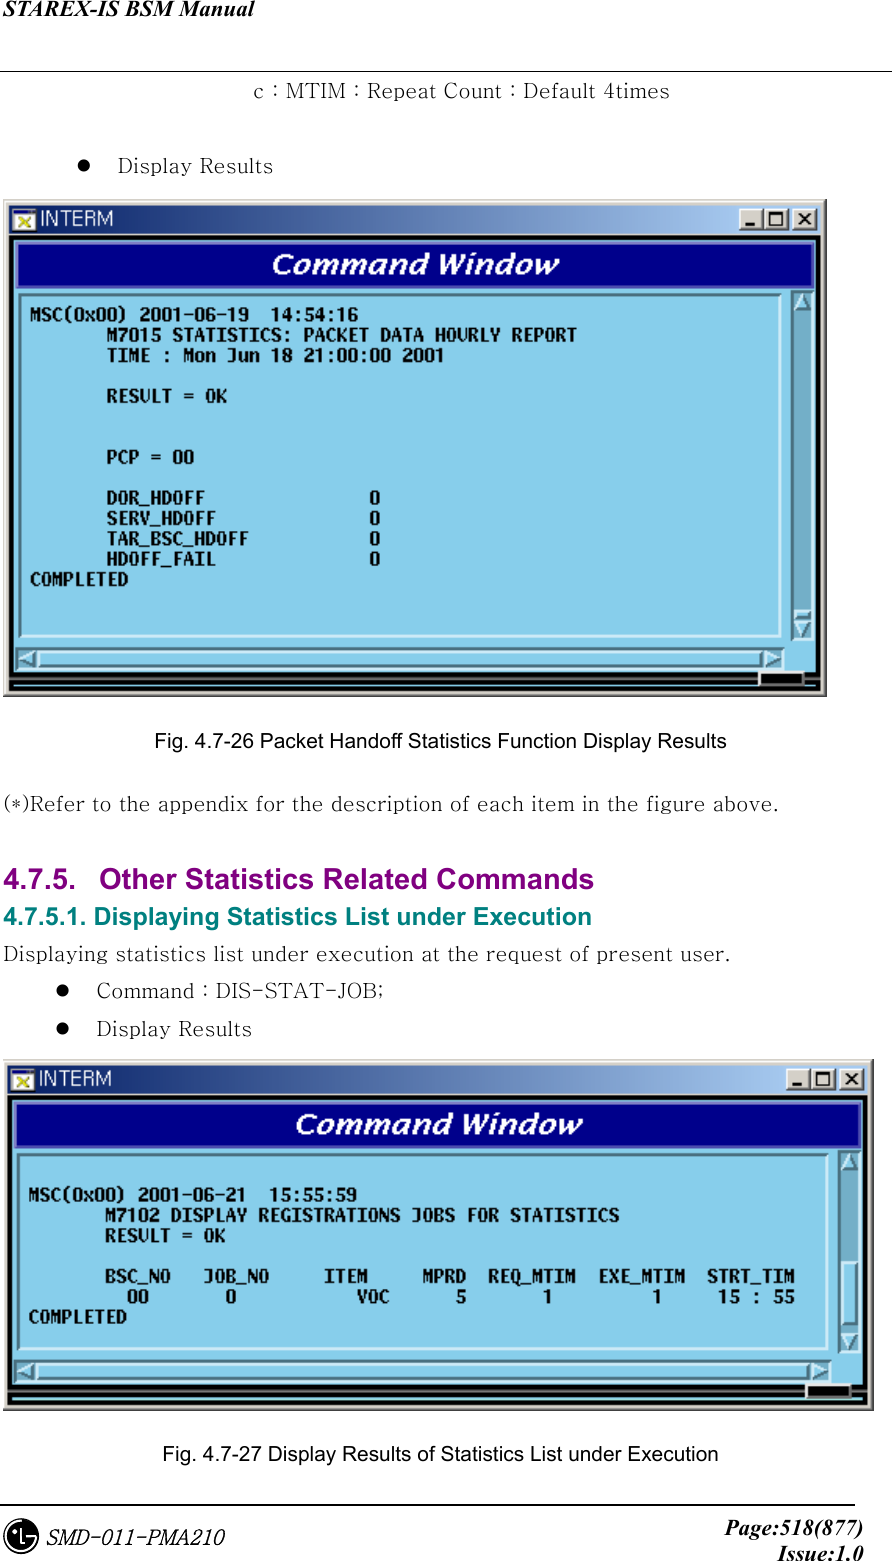 STAREX-IS BSM Manual     Page:518(877)Issue:1.0SMD-011-PMA210       c : MTIM : Repeat Count : Default 4times    Display Results  Fig. 4.7-26 Packet Handoff Statistics Function Display Results (*)Refer to the appendix for the description of each item in the figure above.  4.7.5.   Other Statistics Related Commands 4.7.5.1. Displaying Statistics List under Execution Displaying statistics list under execution at the request of present user.   Command : DIS-STAT-JOB;   Display Results  Fig. 4.7-27 Display Results of Statistics List under Execution 